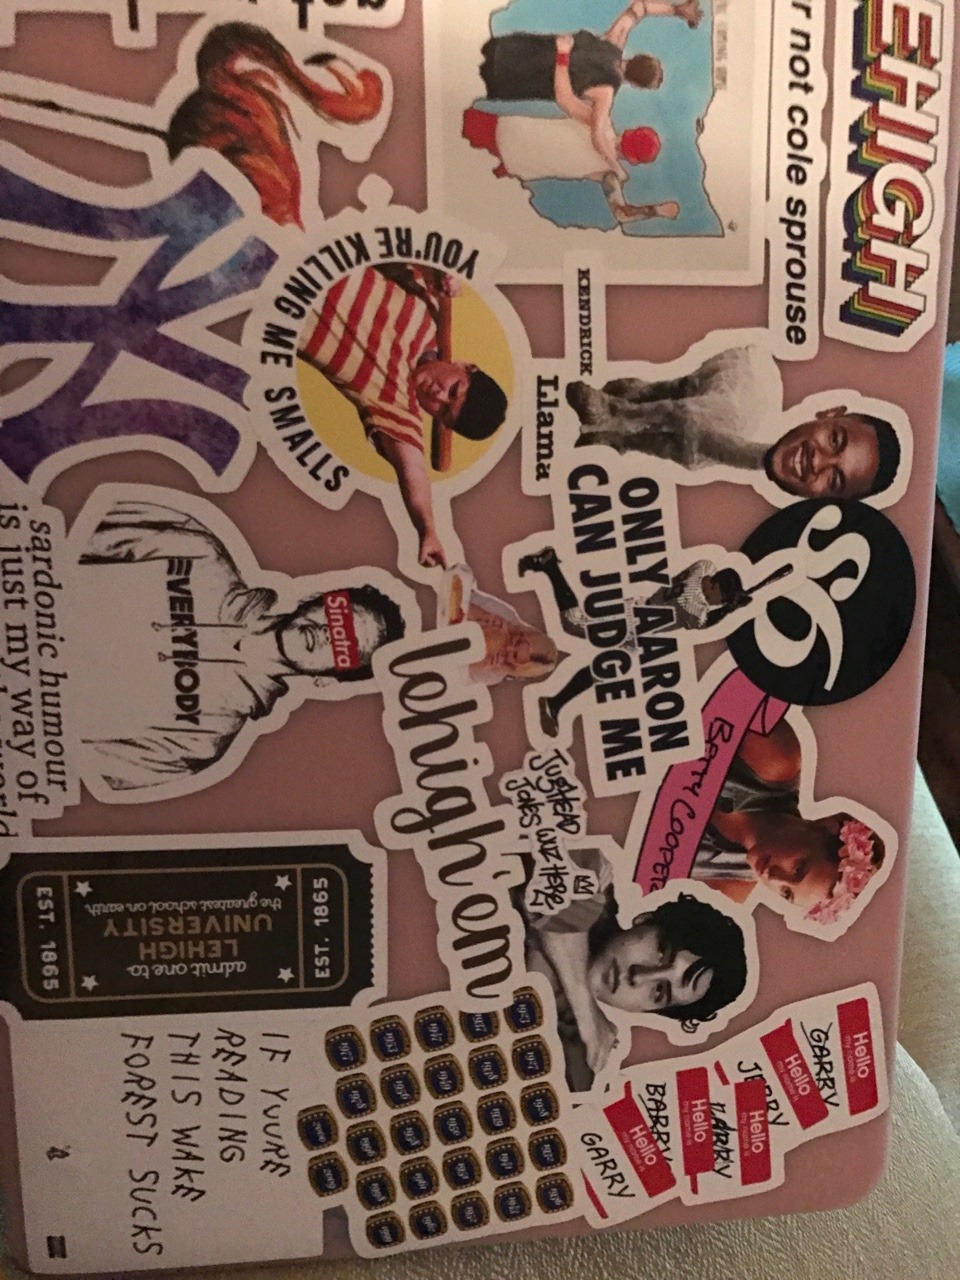 My Yankee stickers are my favorite